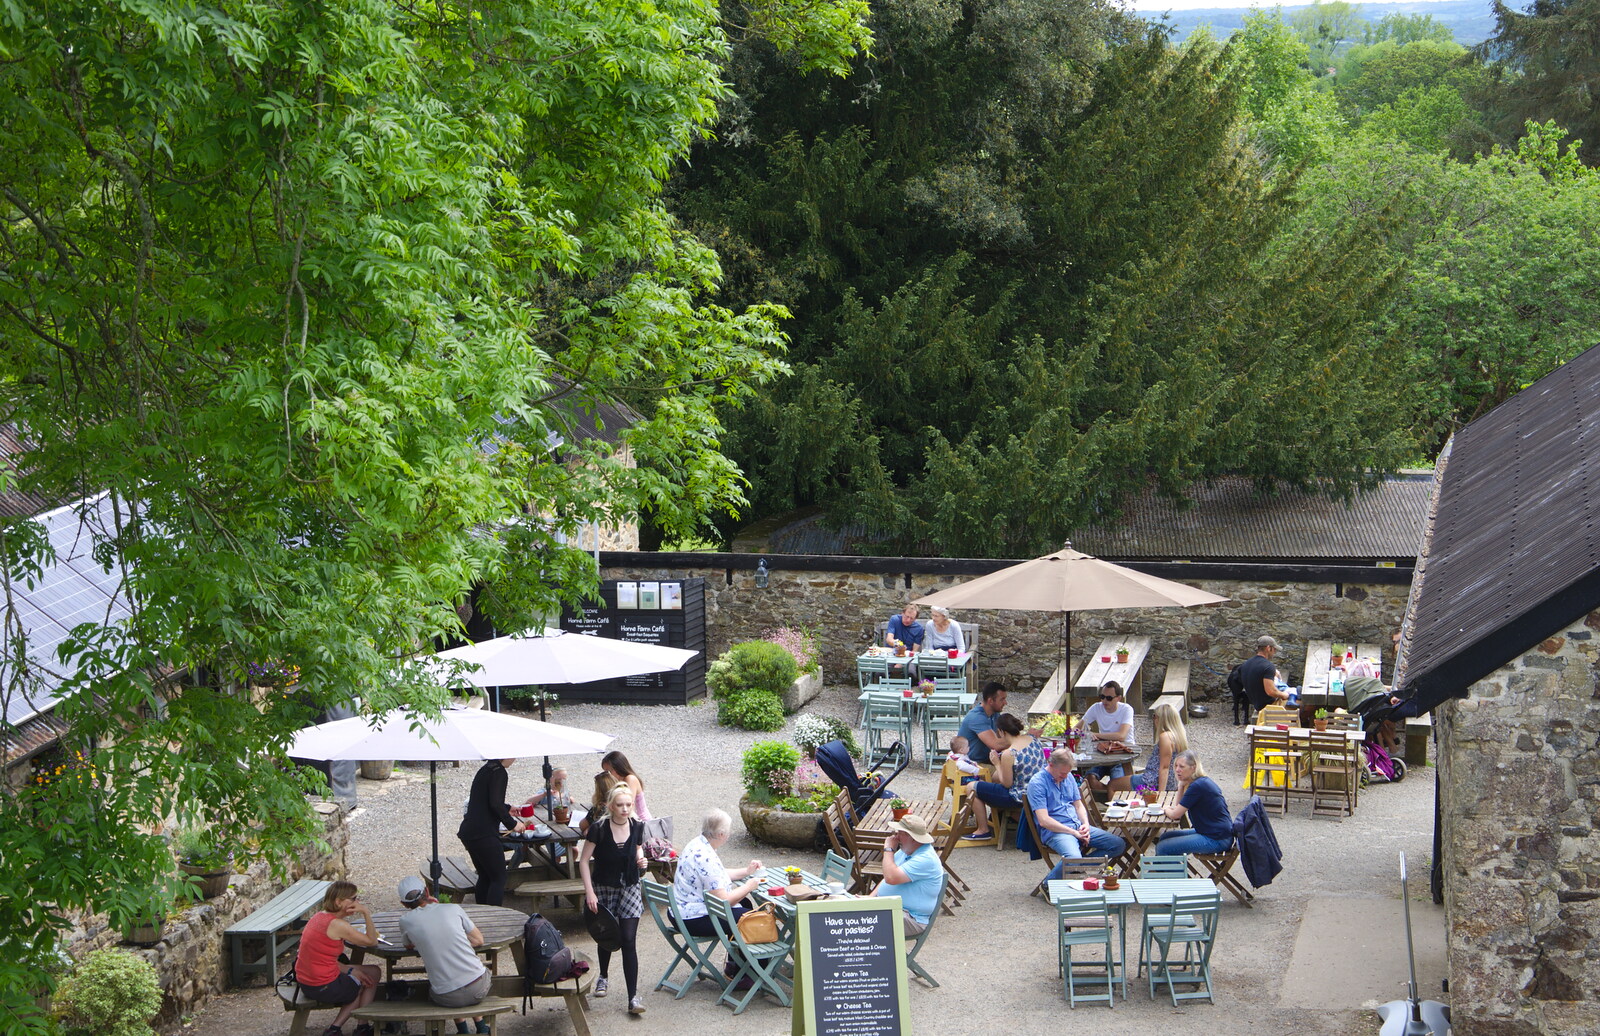 Chagford Lido and a Trip to Parke, Bovey Tracey, Devon - 25th May 2019: A view of the café